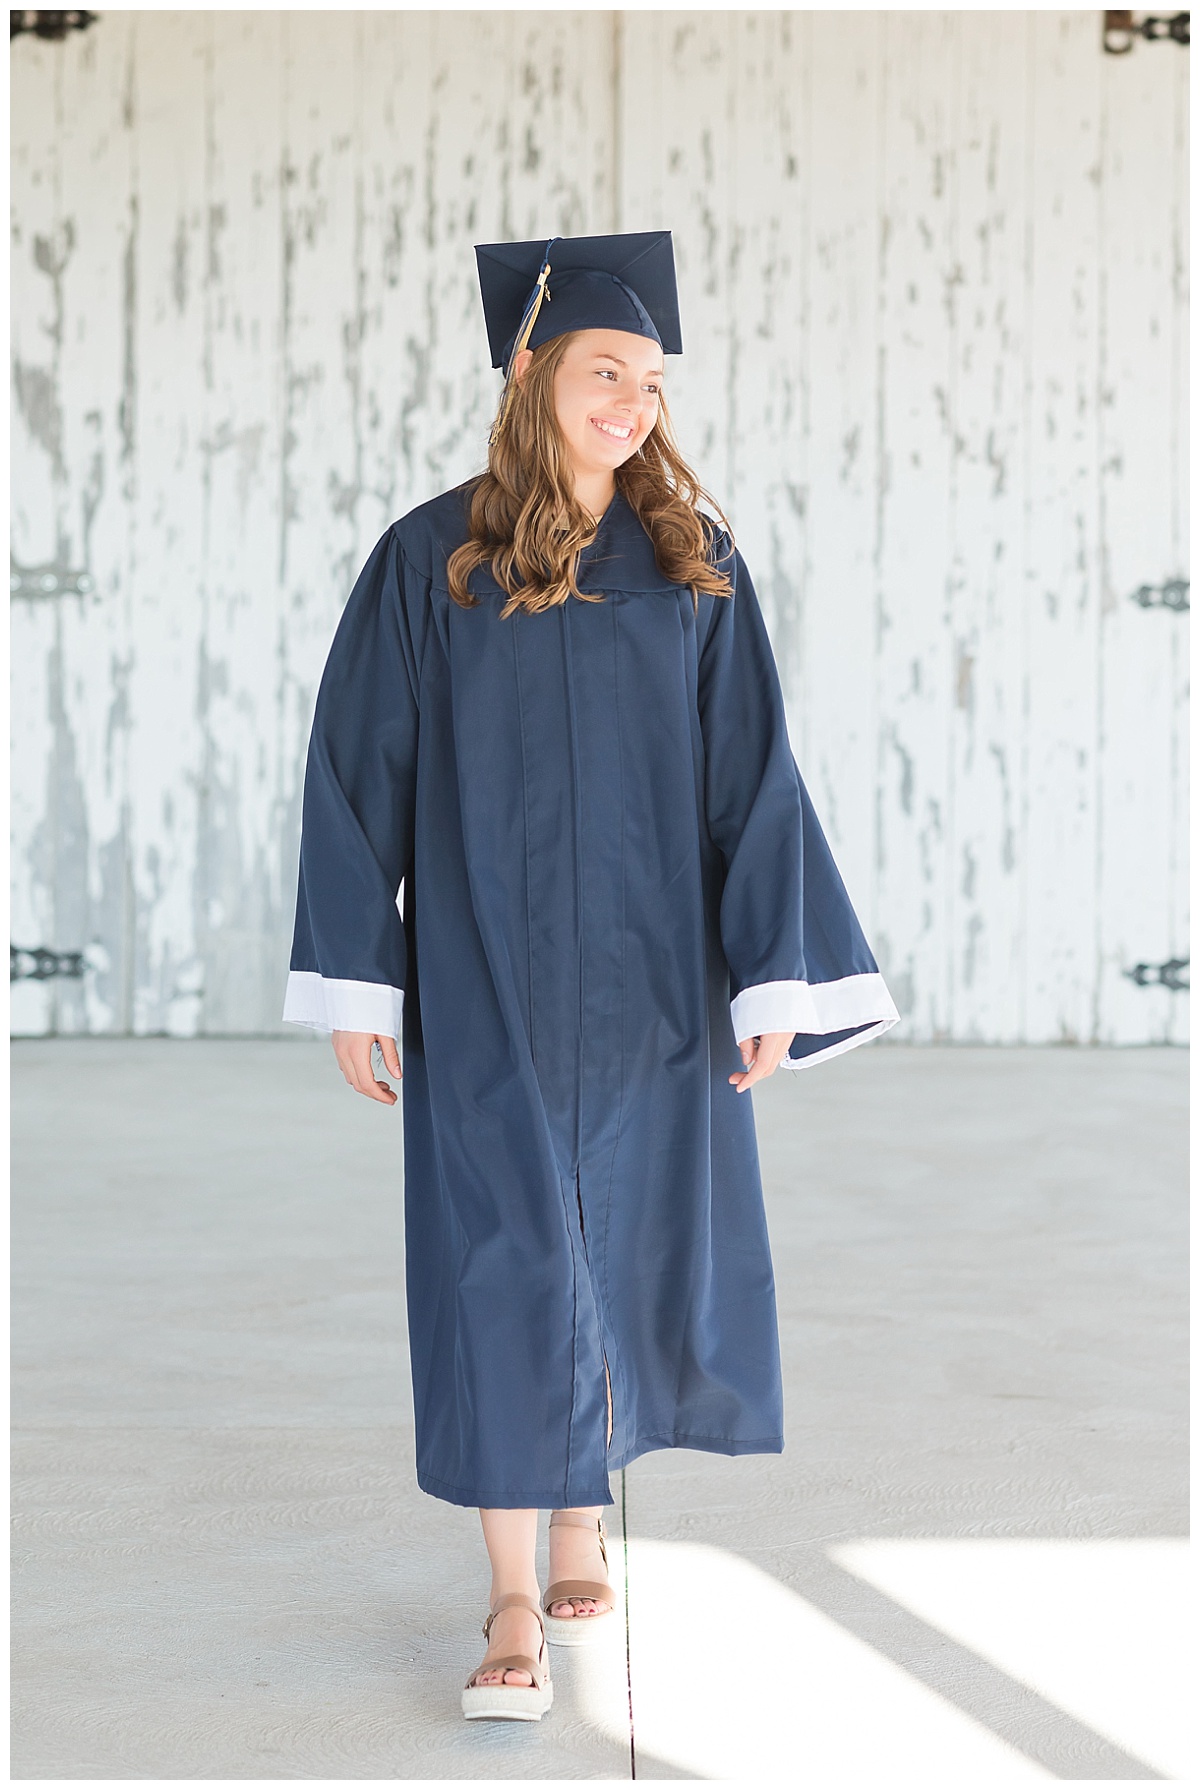 Senior Girl in cap and gown photo by Simply Seeking Photography